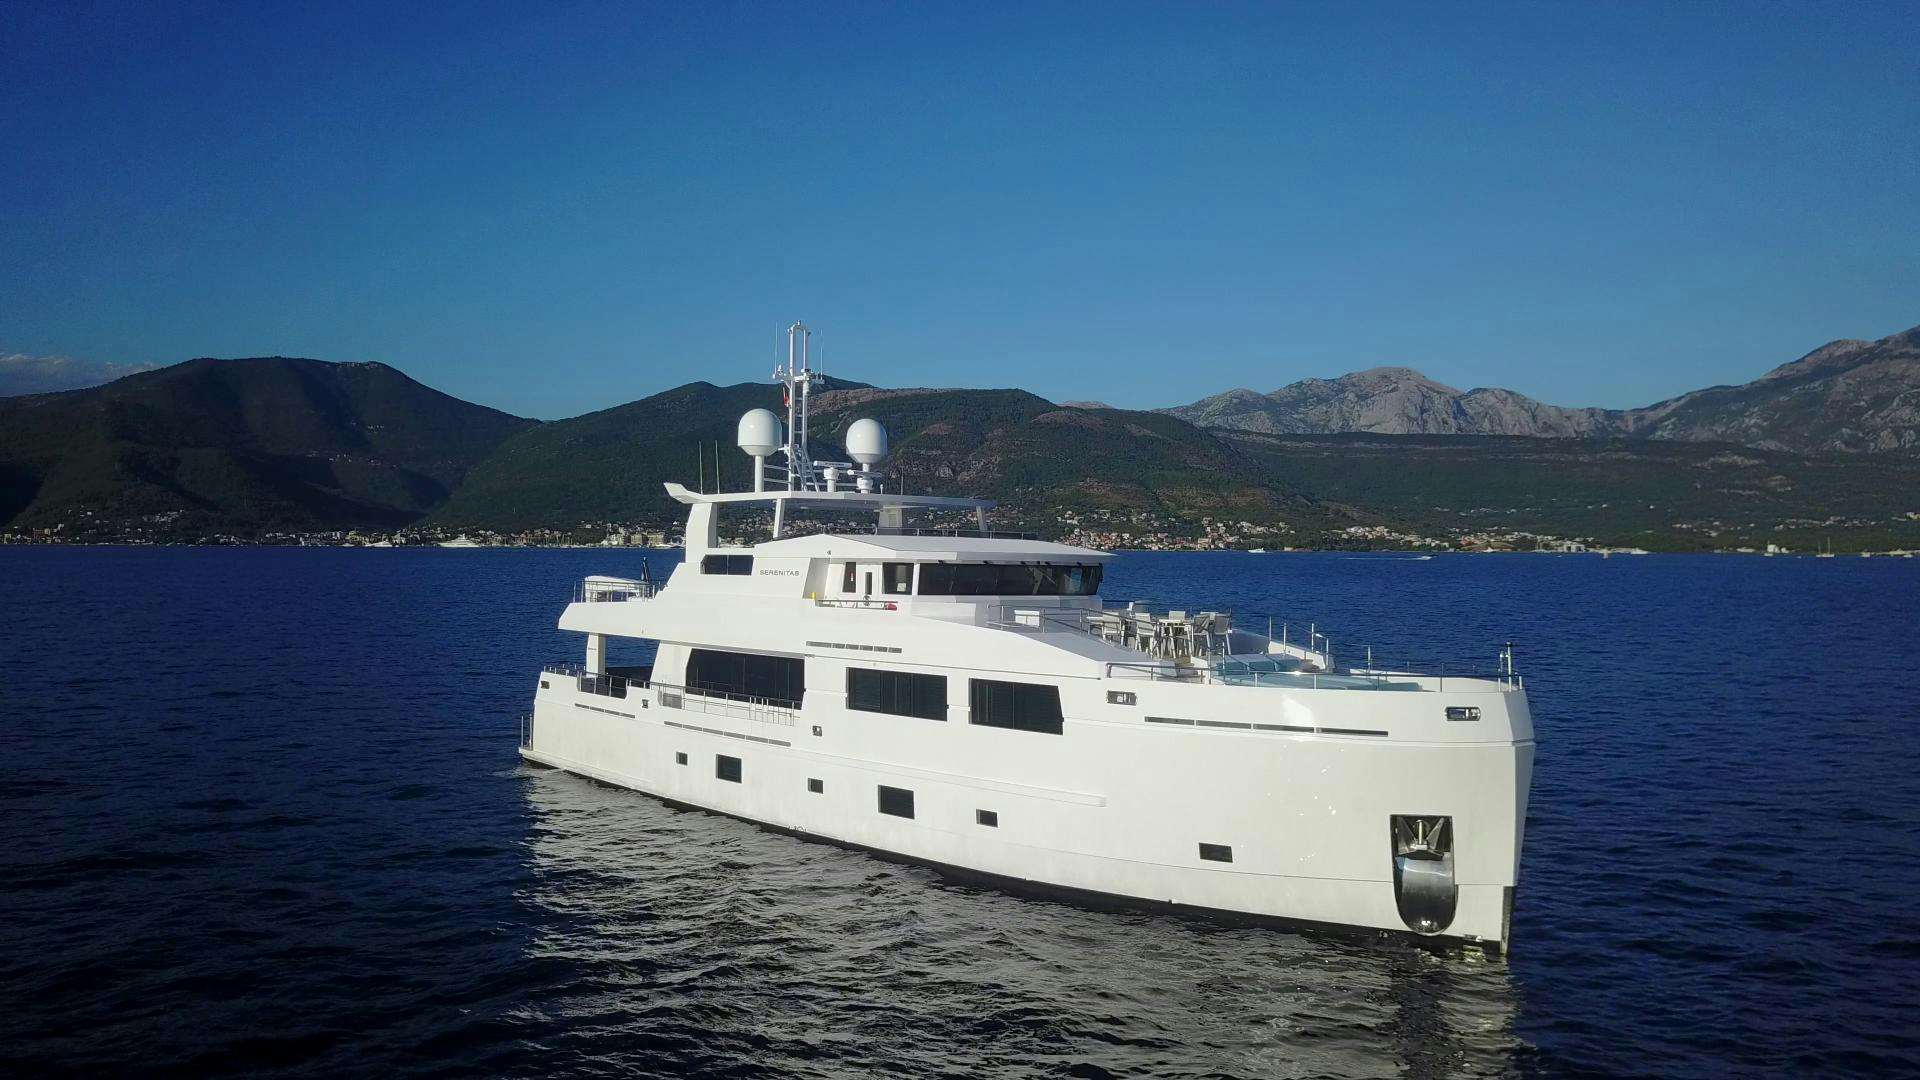 Watch Video for CURFEW II Yacht for Sale